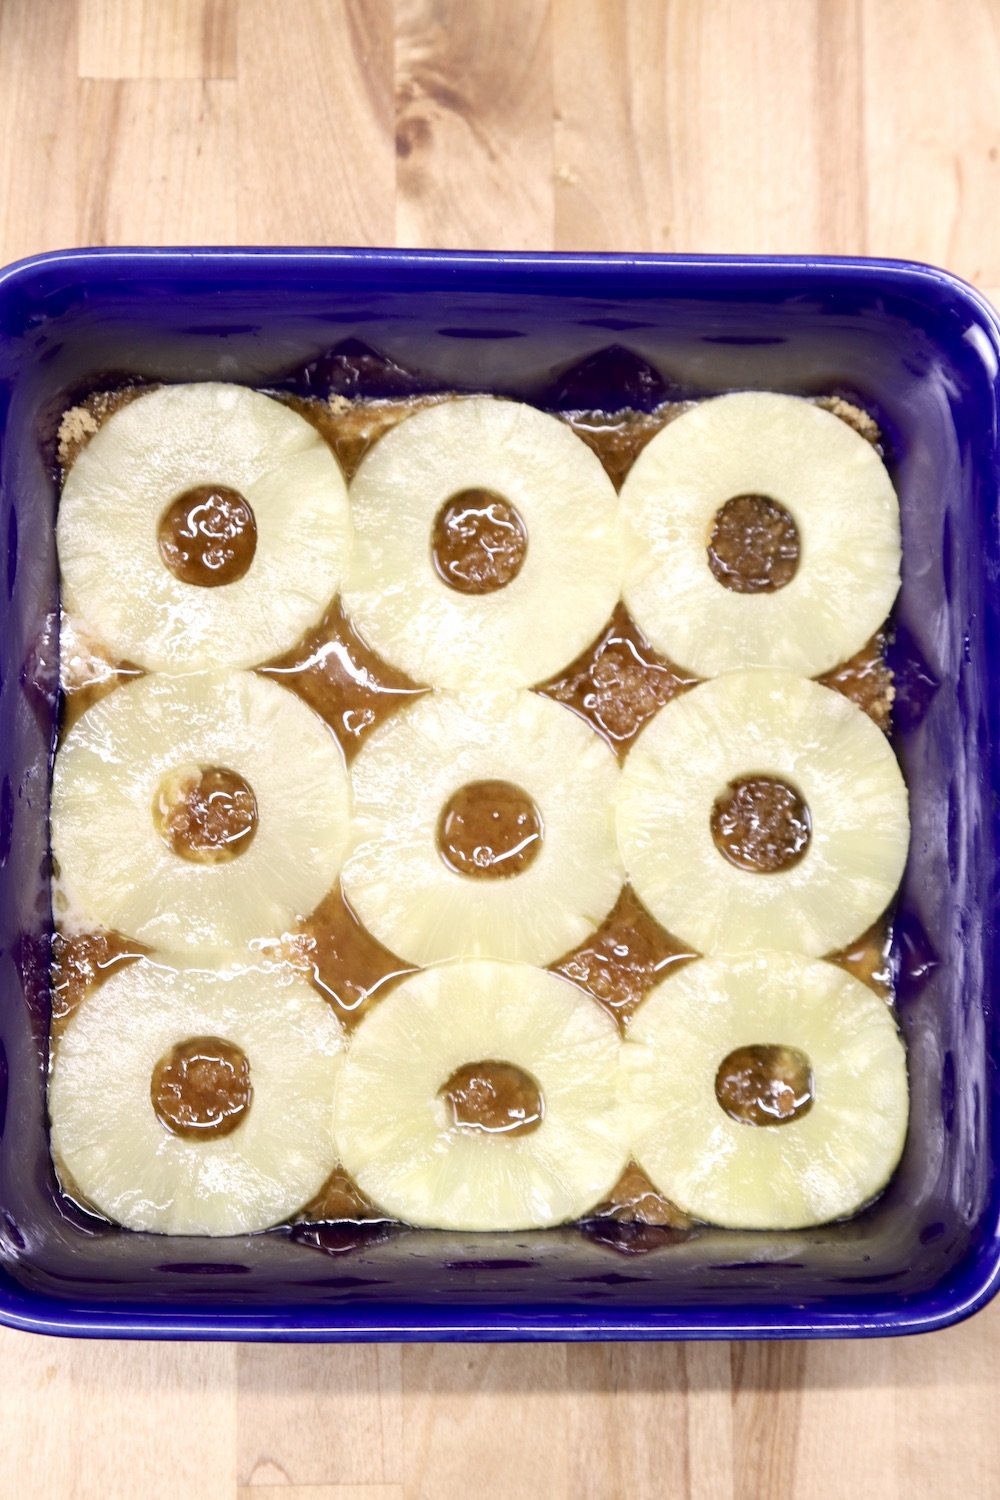 9 pineapple rings over brown sugar mixture in a blue baking dish